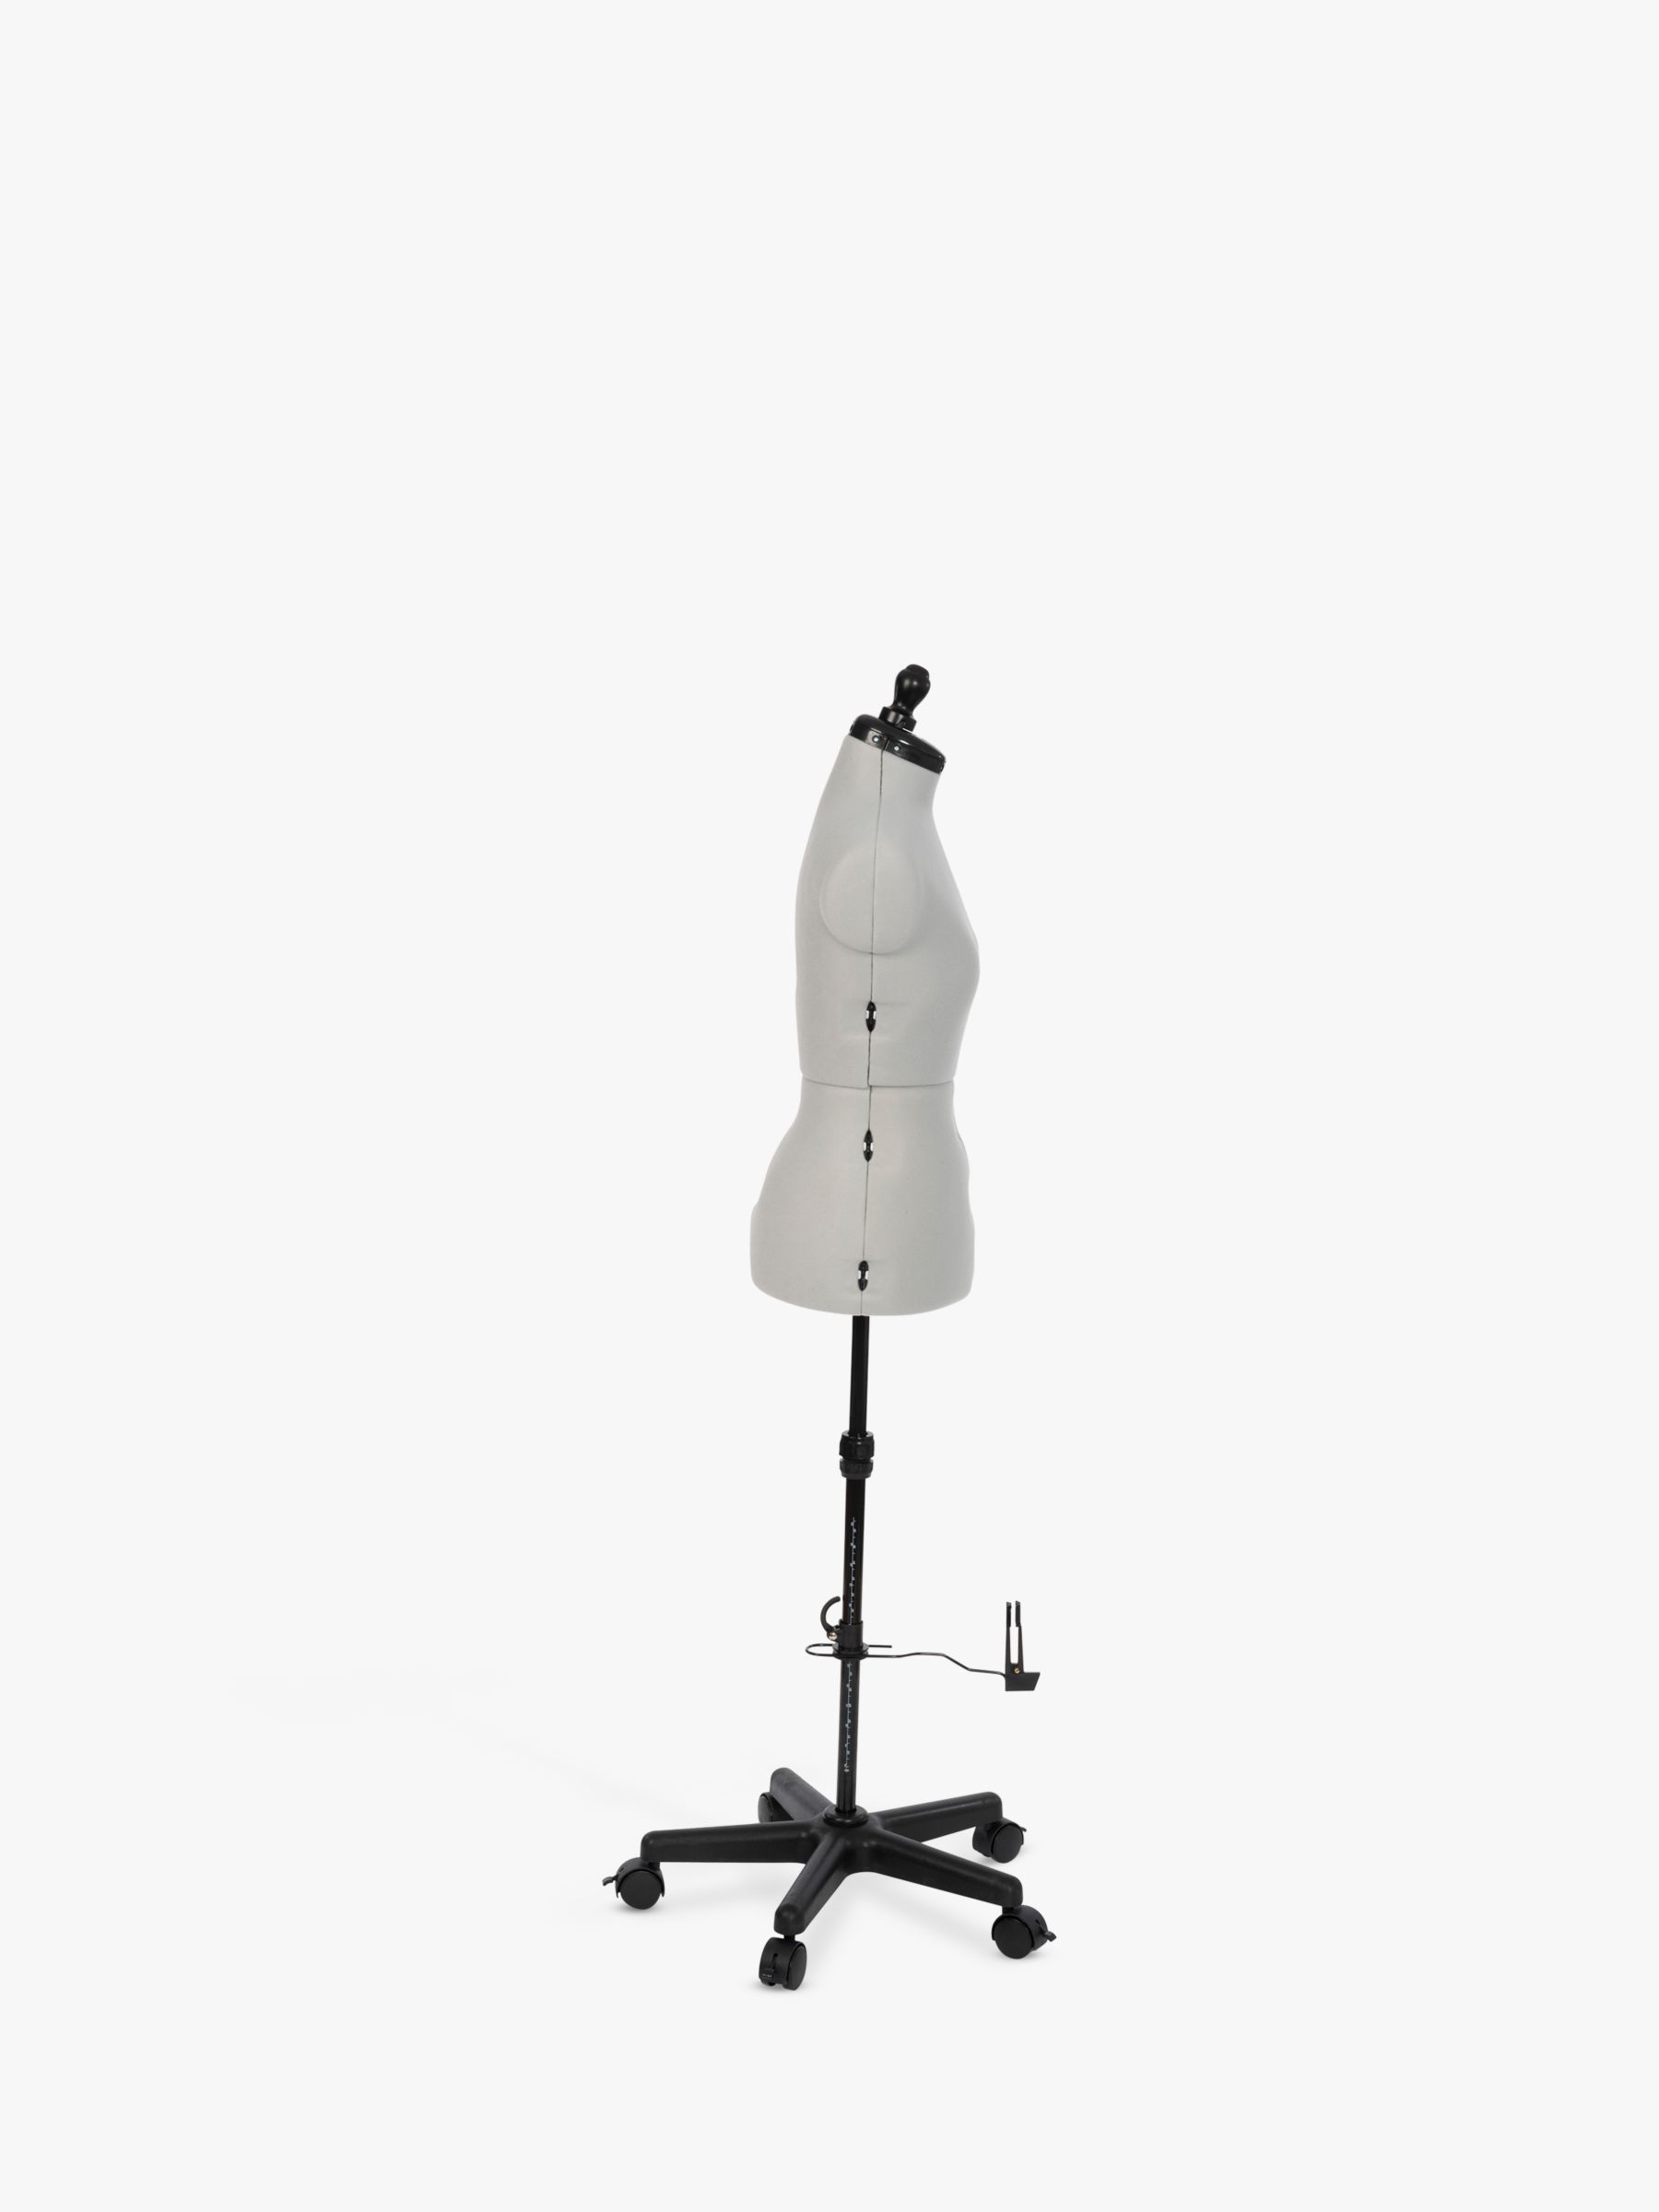 Deluxe Female Dressmakers Mannequin - Cream (choice of stands) - The Shop  Fitting Shop